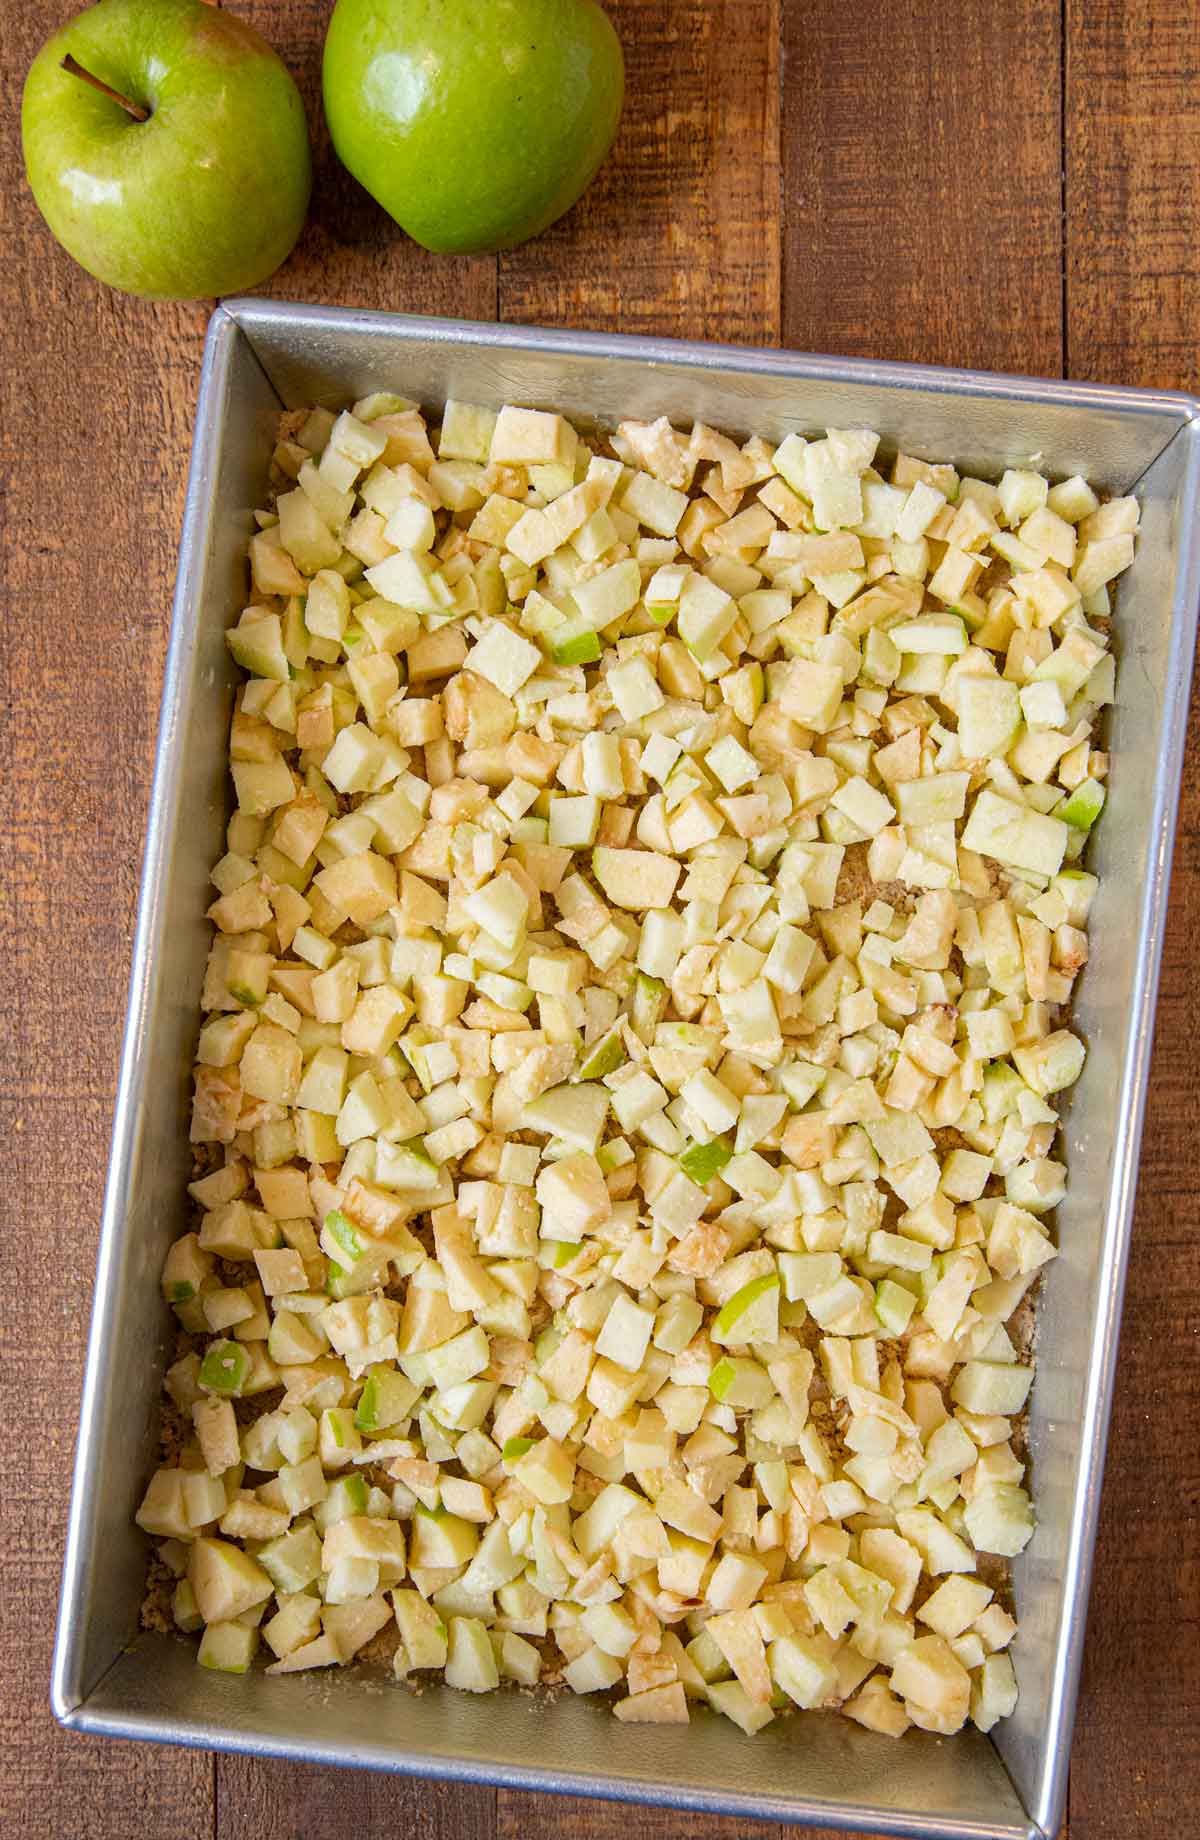 Caramel Apple Bars before streusel topping and baking